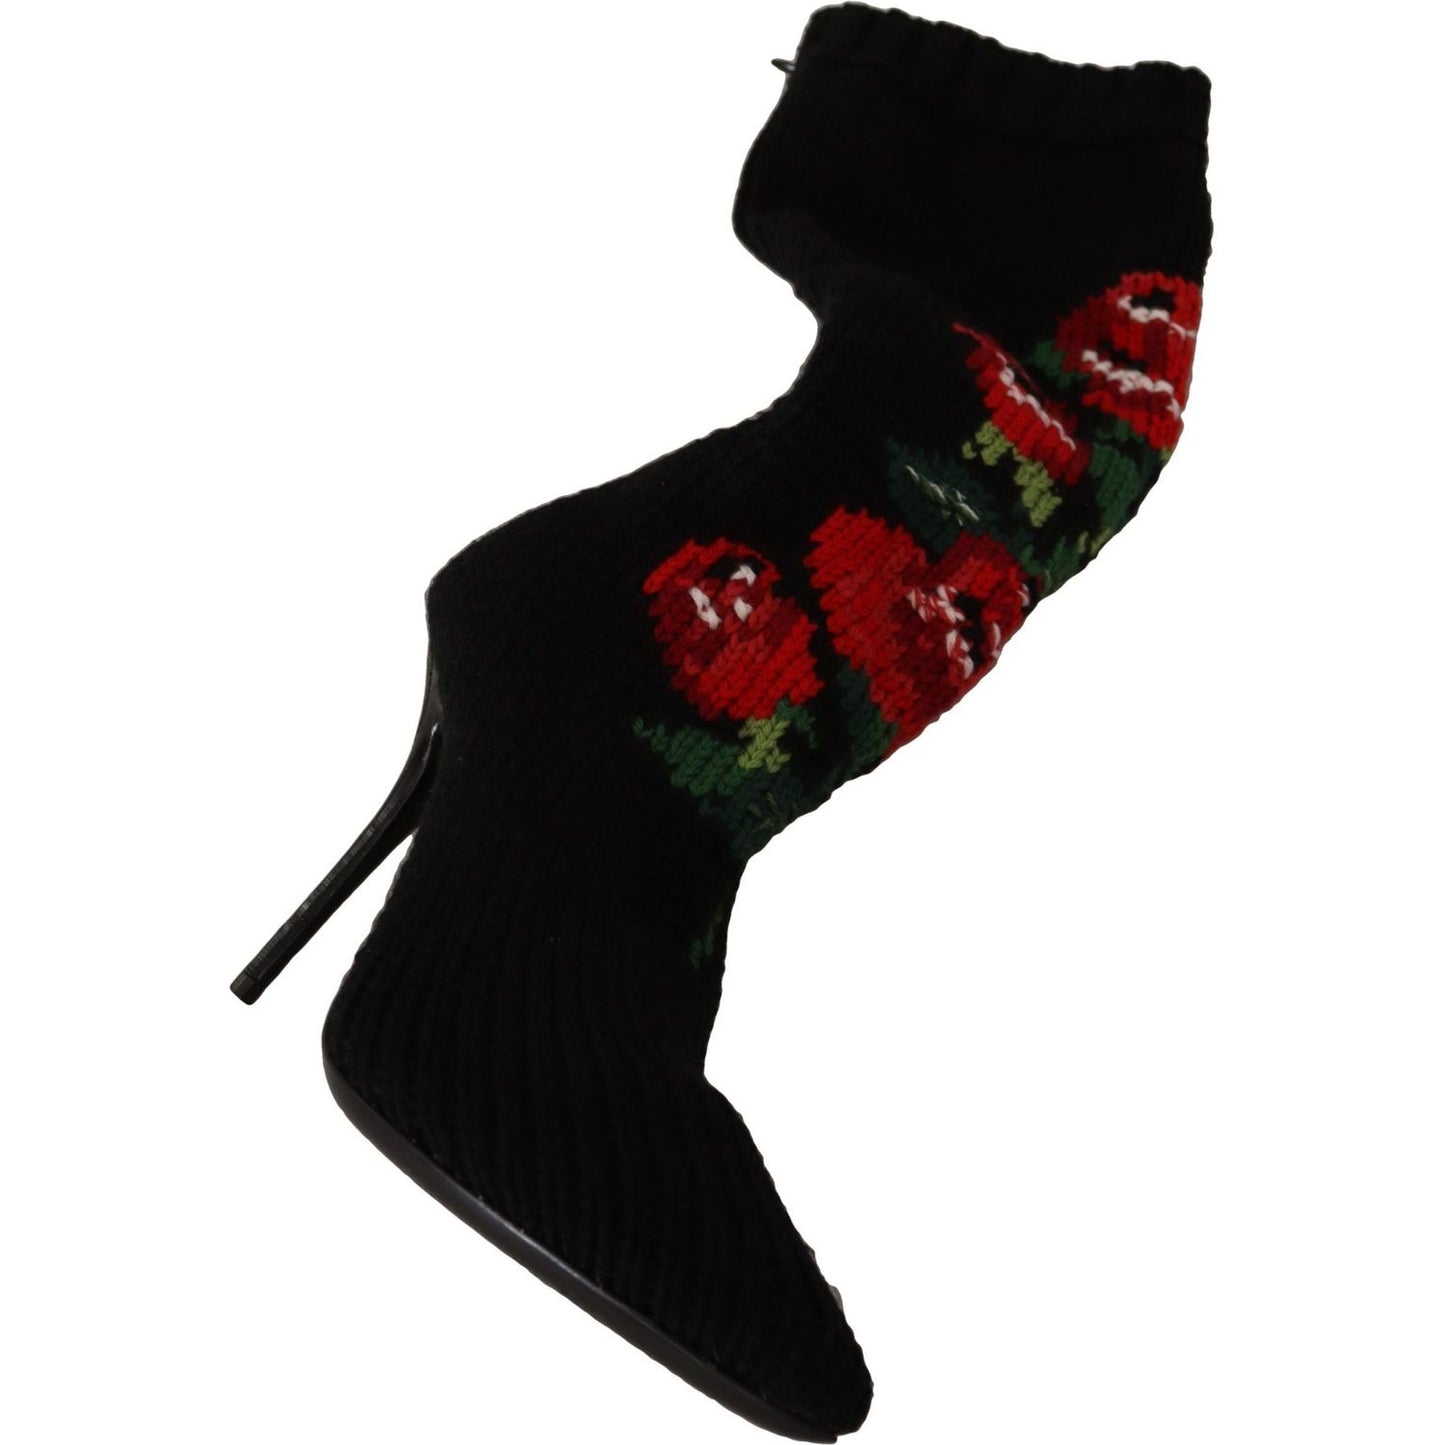 Dolce & Gabbana Elegant Sock Boots with Red Roses Detail black-stretch-socks-red-roses-booties-shoes